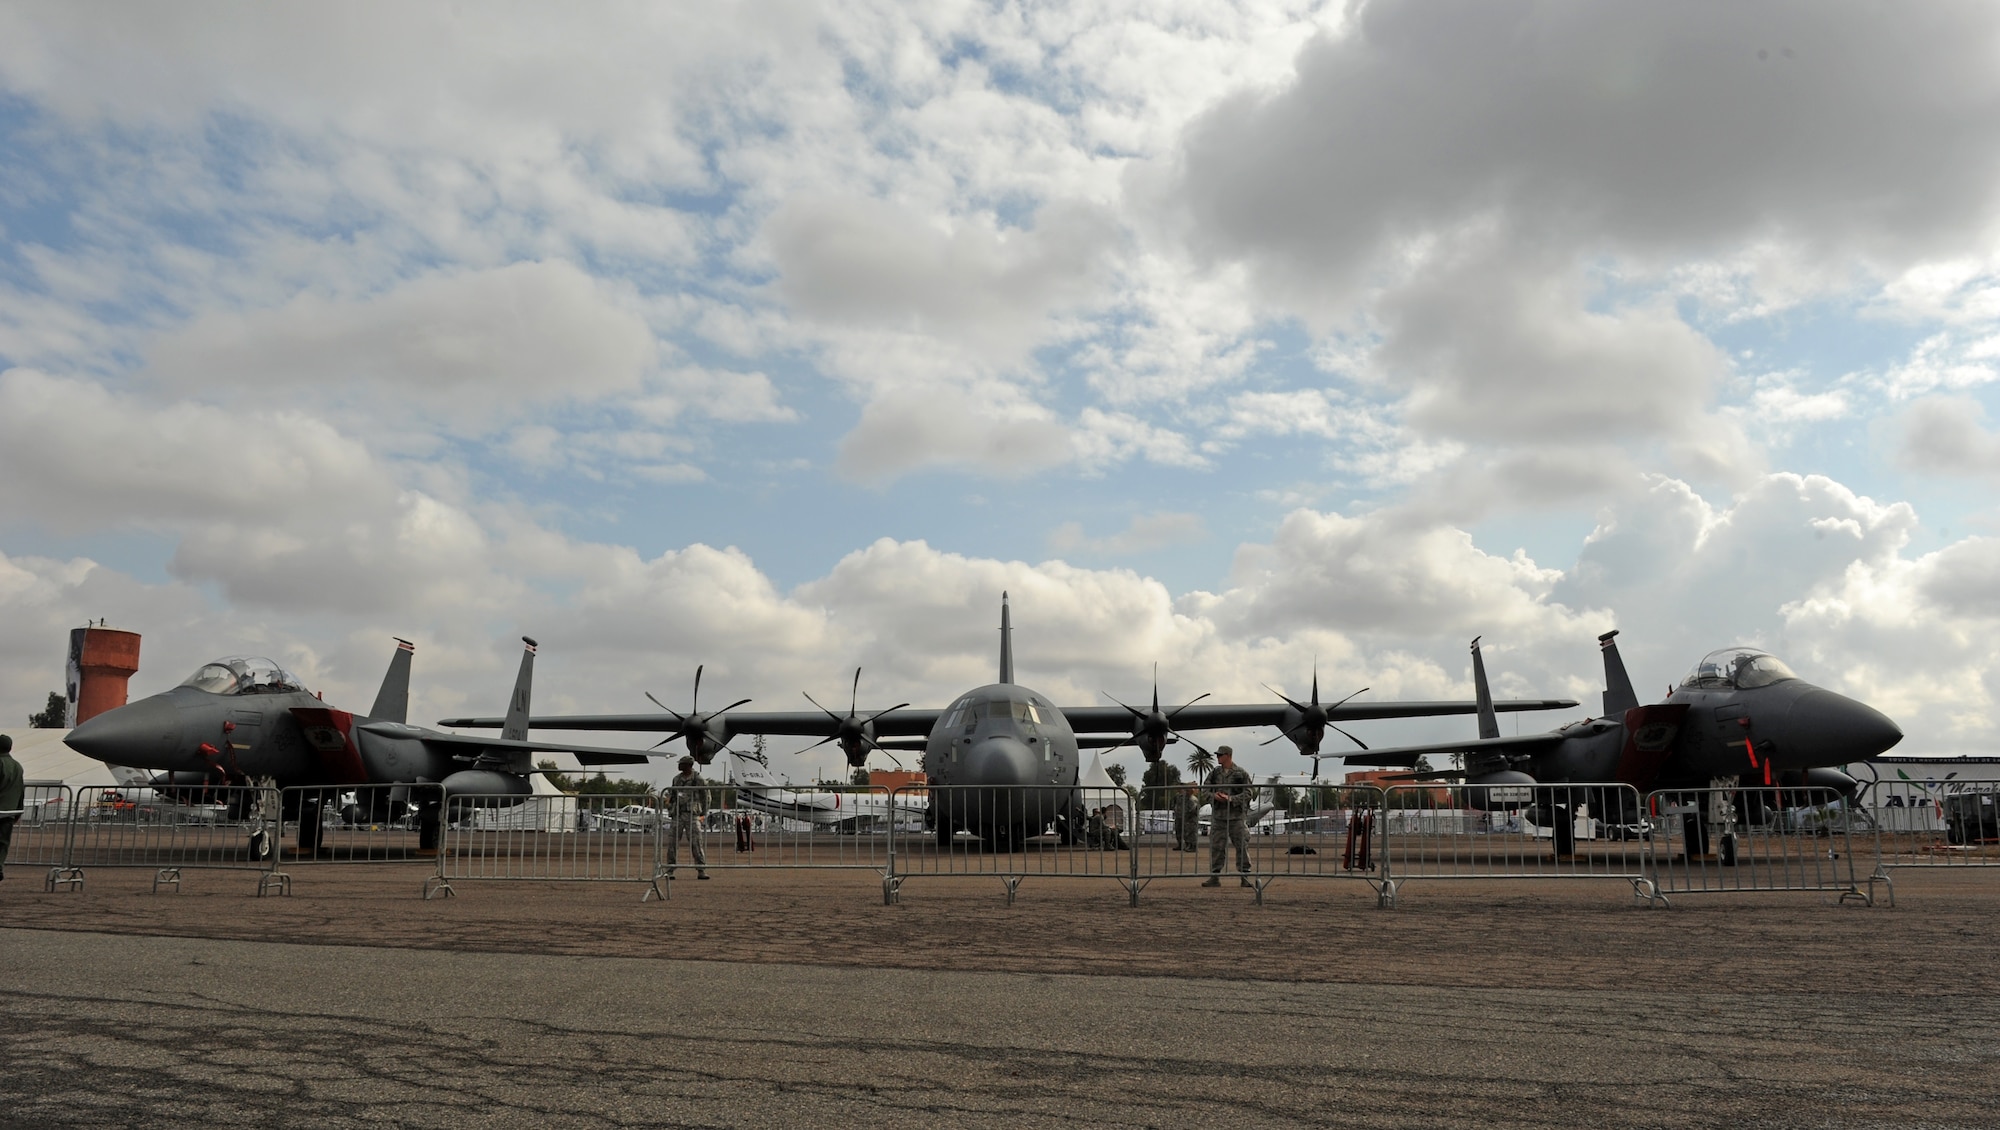 MARRAKECH, Morocco -- A C-130J Super Hercules sits between two F-15E Strike Eagles on the flightline at the Marrakech Aeroexpo April 4, 2012. U.S. Air Forces Africa is participating the third biennial Aeroexpo Marrakech to strengthen the partnerships with the nations involved and show commitment to security and stability in the region. (U.S. Air Force photo/Staff Sgt. Benjamin Wilson)